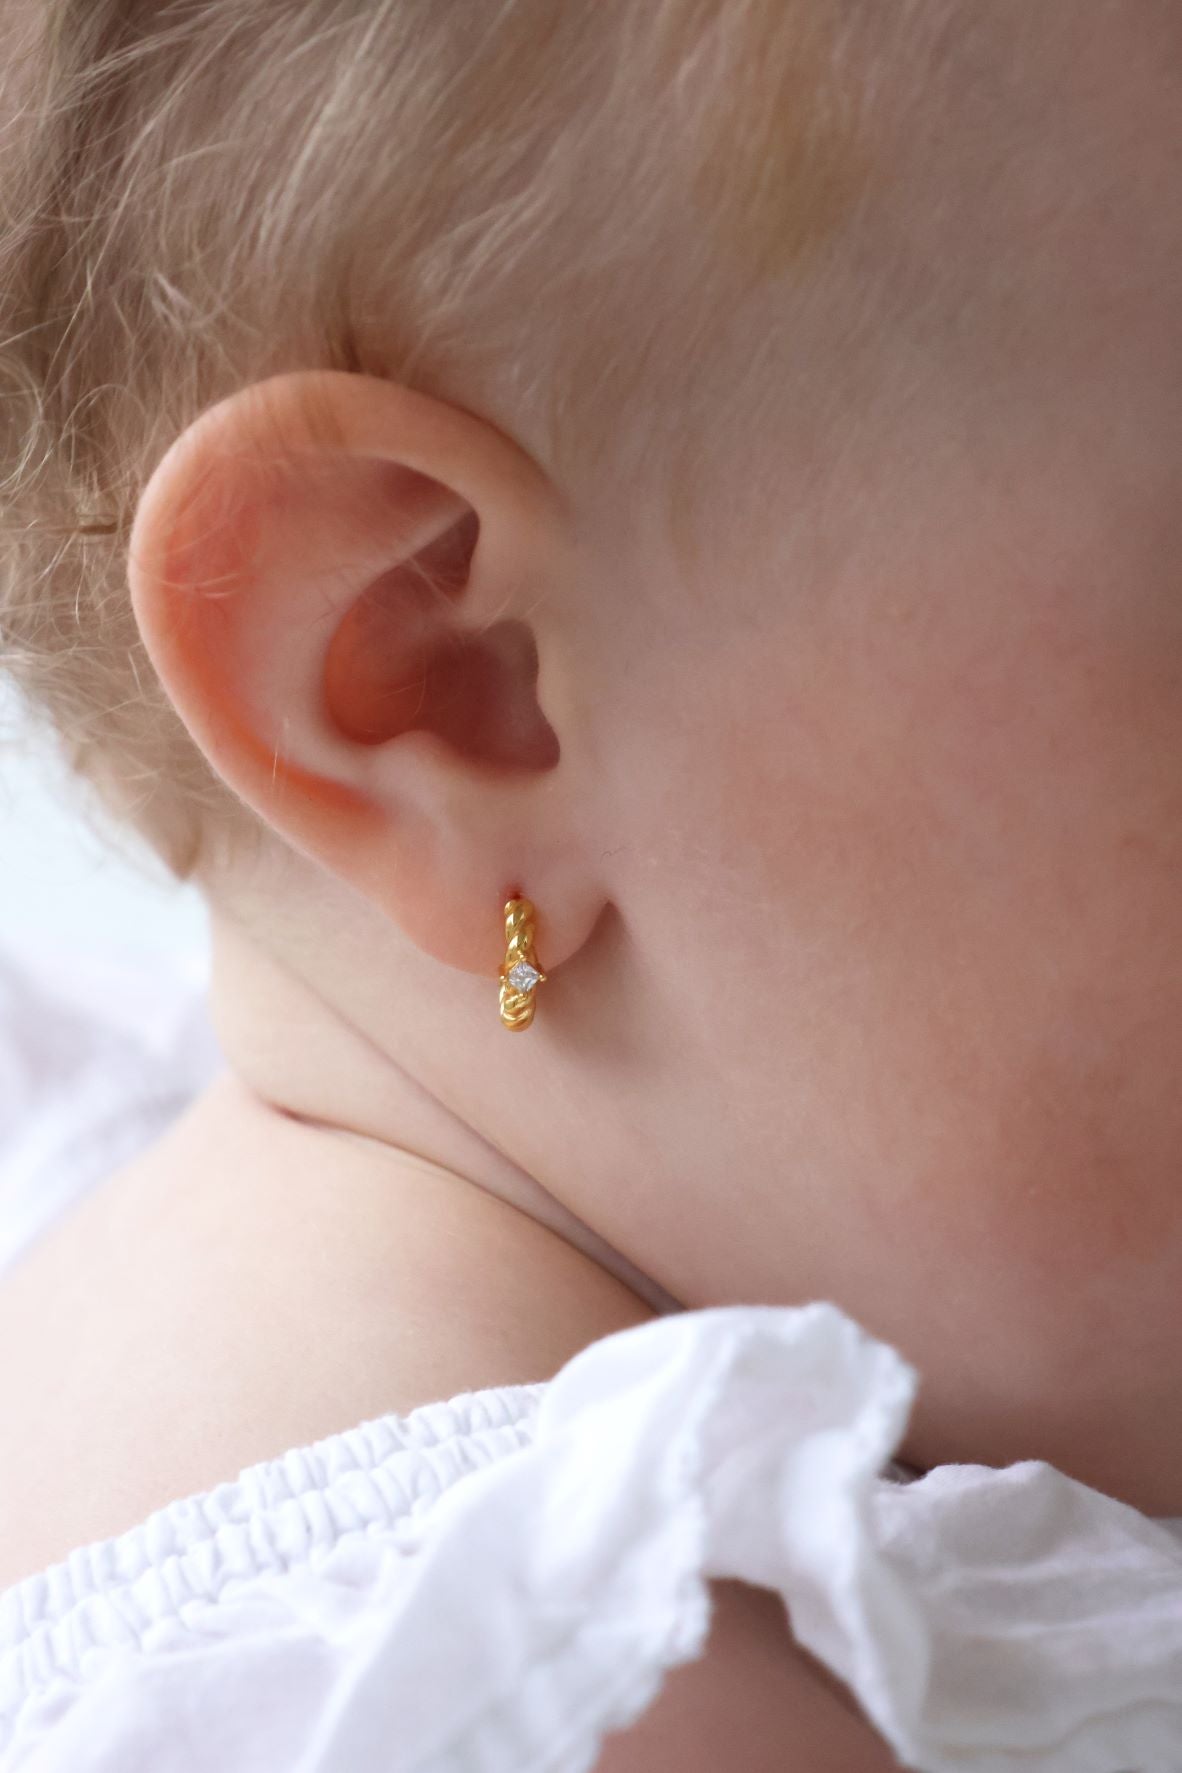 baby with earring